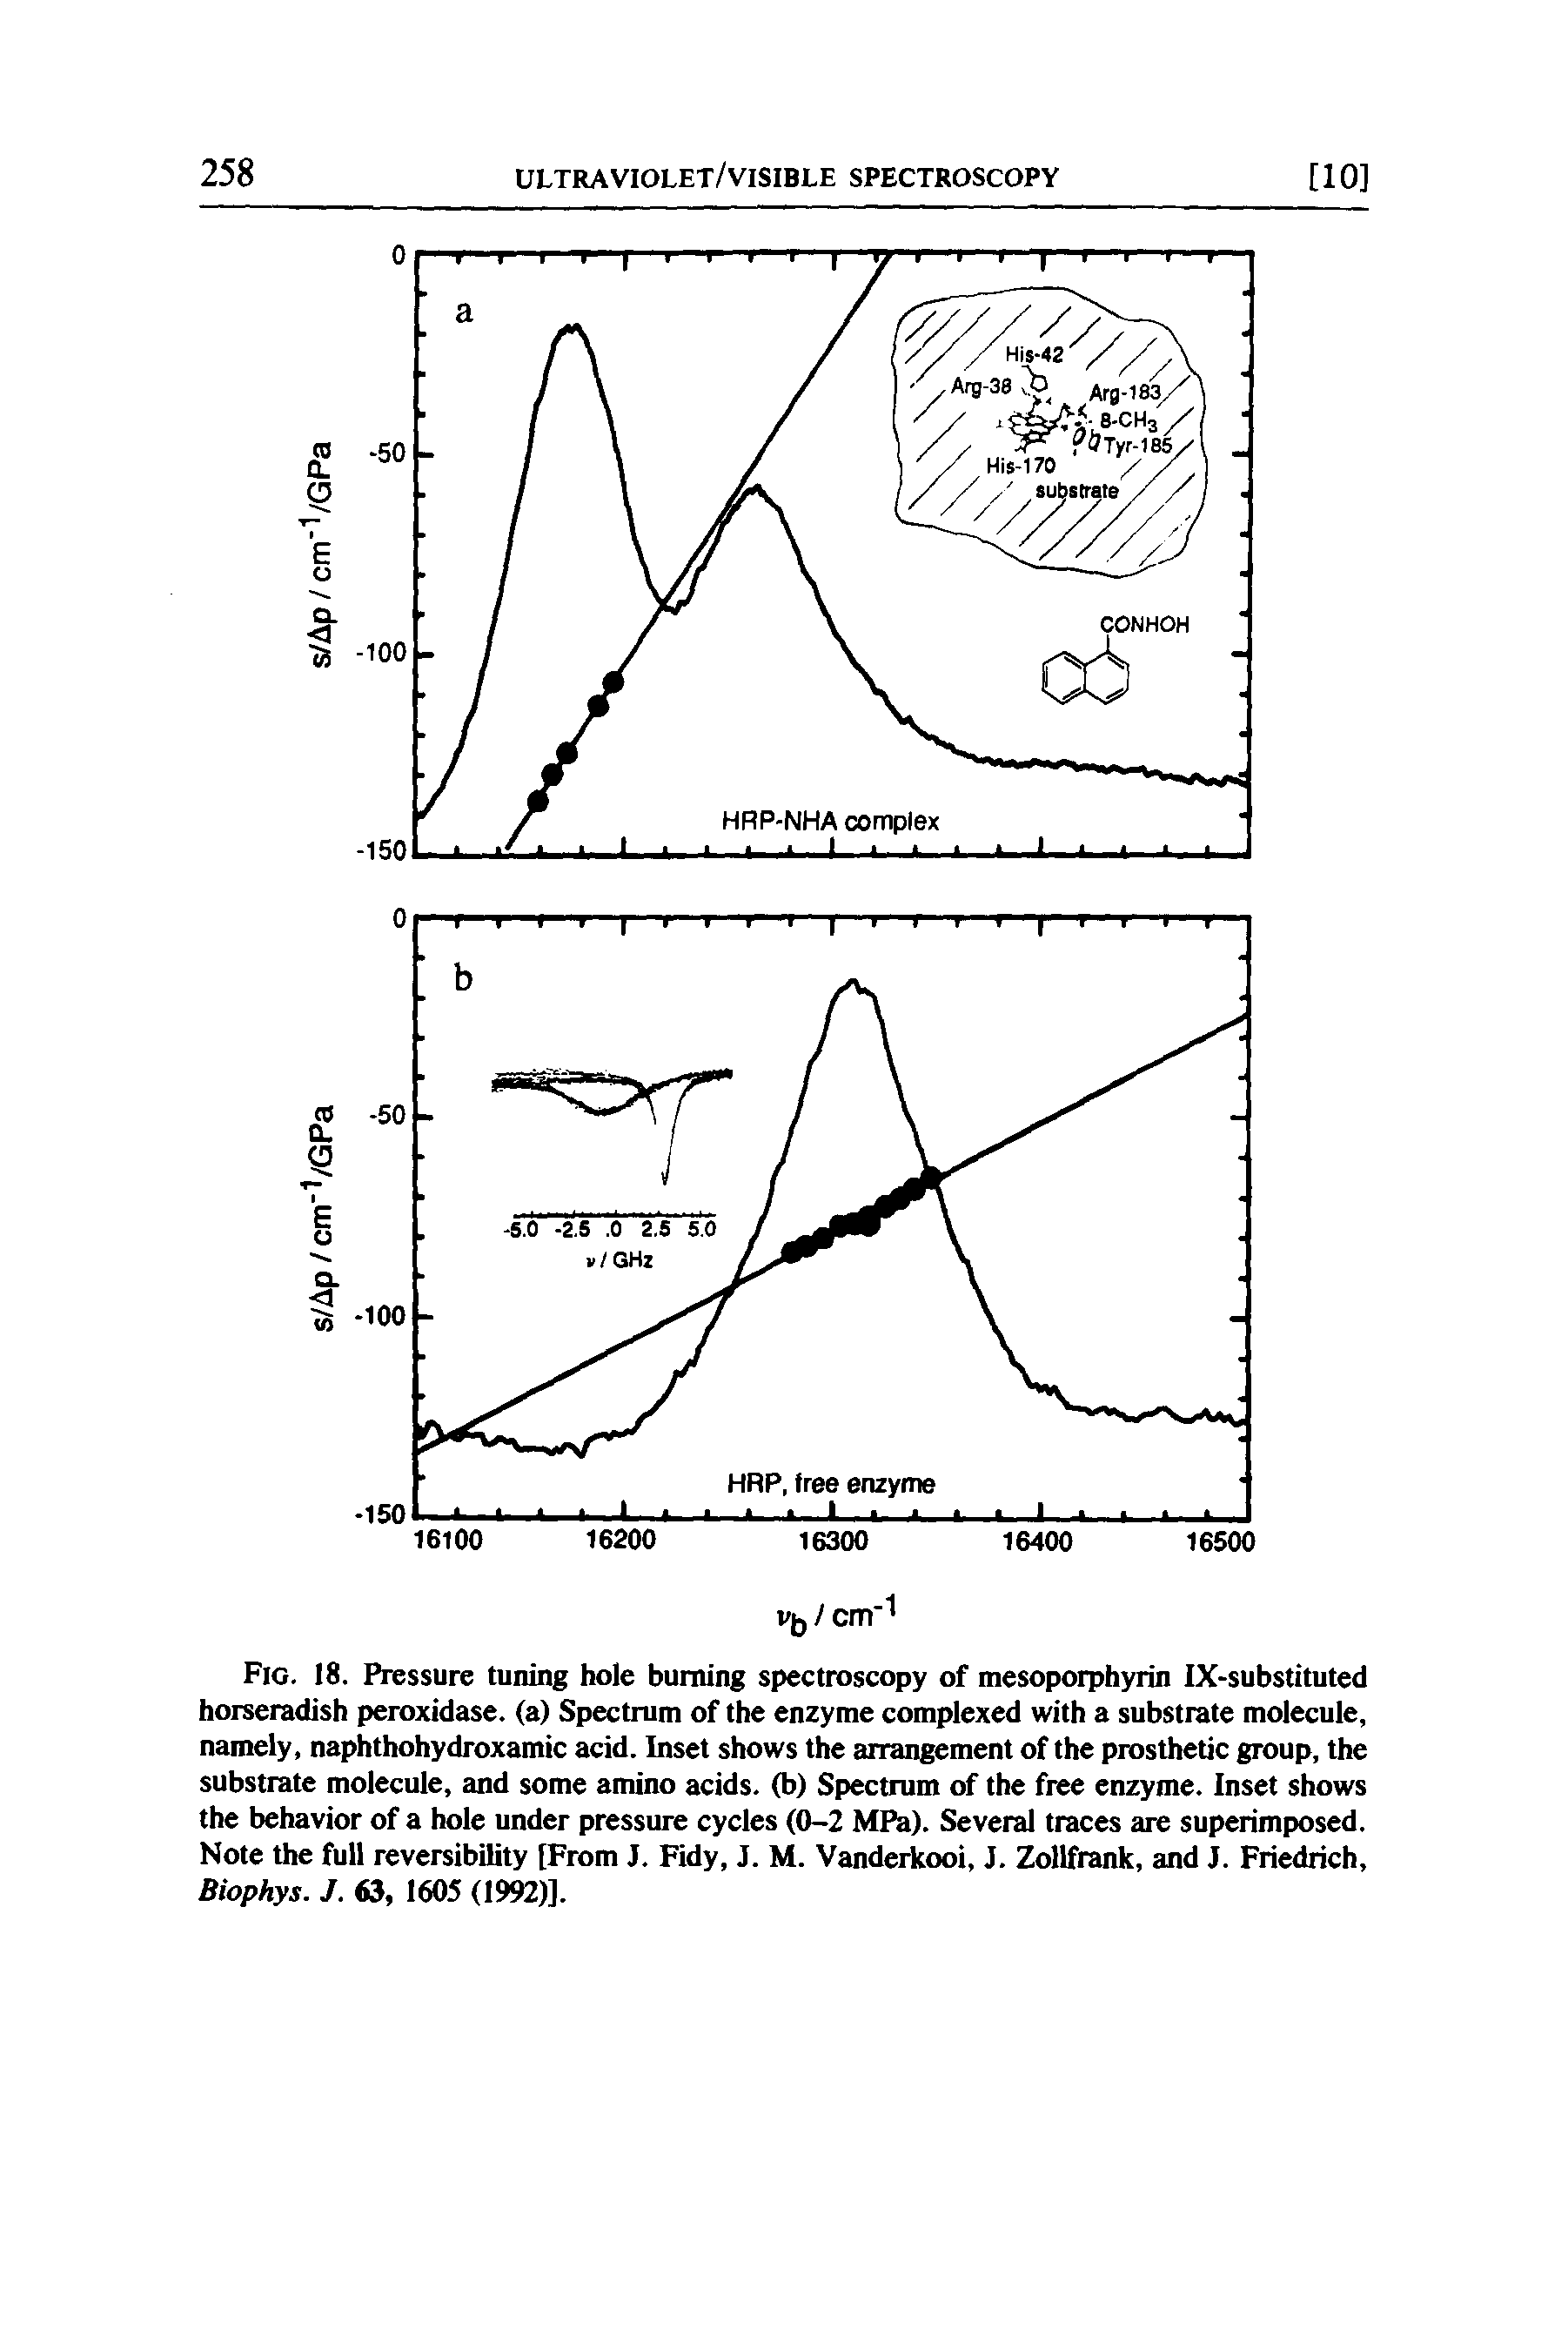 Fig. 18. Pressure tuning hole burning spectroscopy of mesoporphyrin IX-substituted horseradish peroxidase, (a) Spectrum of the enzyme complexed with a substrate molecule, namely, naphthohydroxamic acid. Inset shows the arrangement of the prosthetic group, the substrate molecule, and some amino acids, (b) Spectrum of the free enzyme. Inset shows the behavior of a hole under pressure cycles (0-2 MPa). Several traces are superimposed. Note the full reversibility [From J. Fidy, J. M. Vanderkooi, J. Zollfrank, and J. Friedrich, Biophys. J. 63, 1605 (1992)].